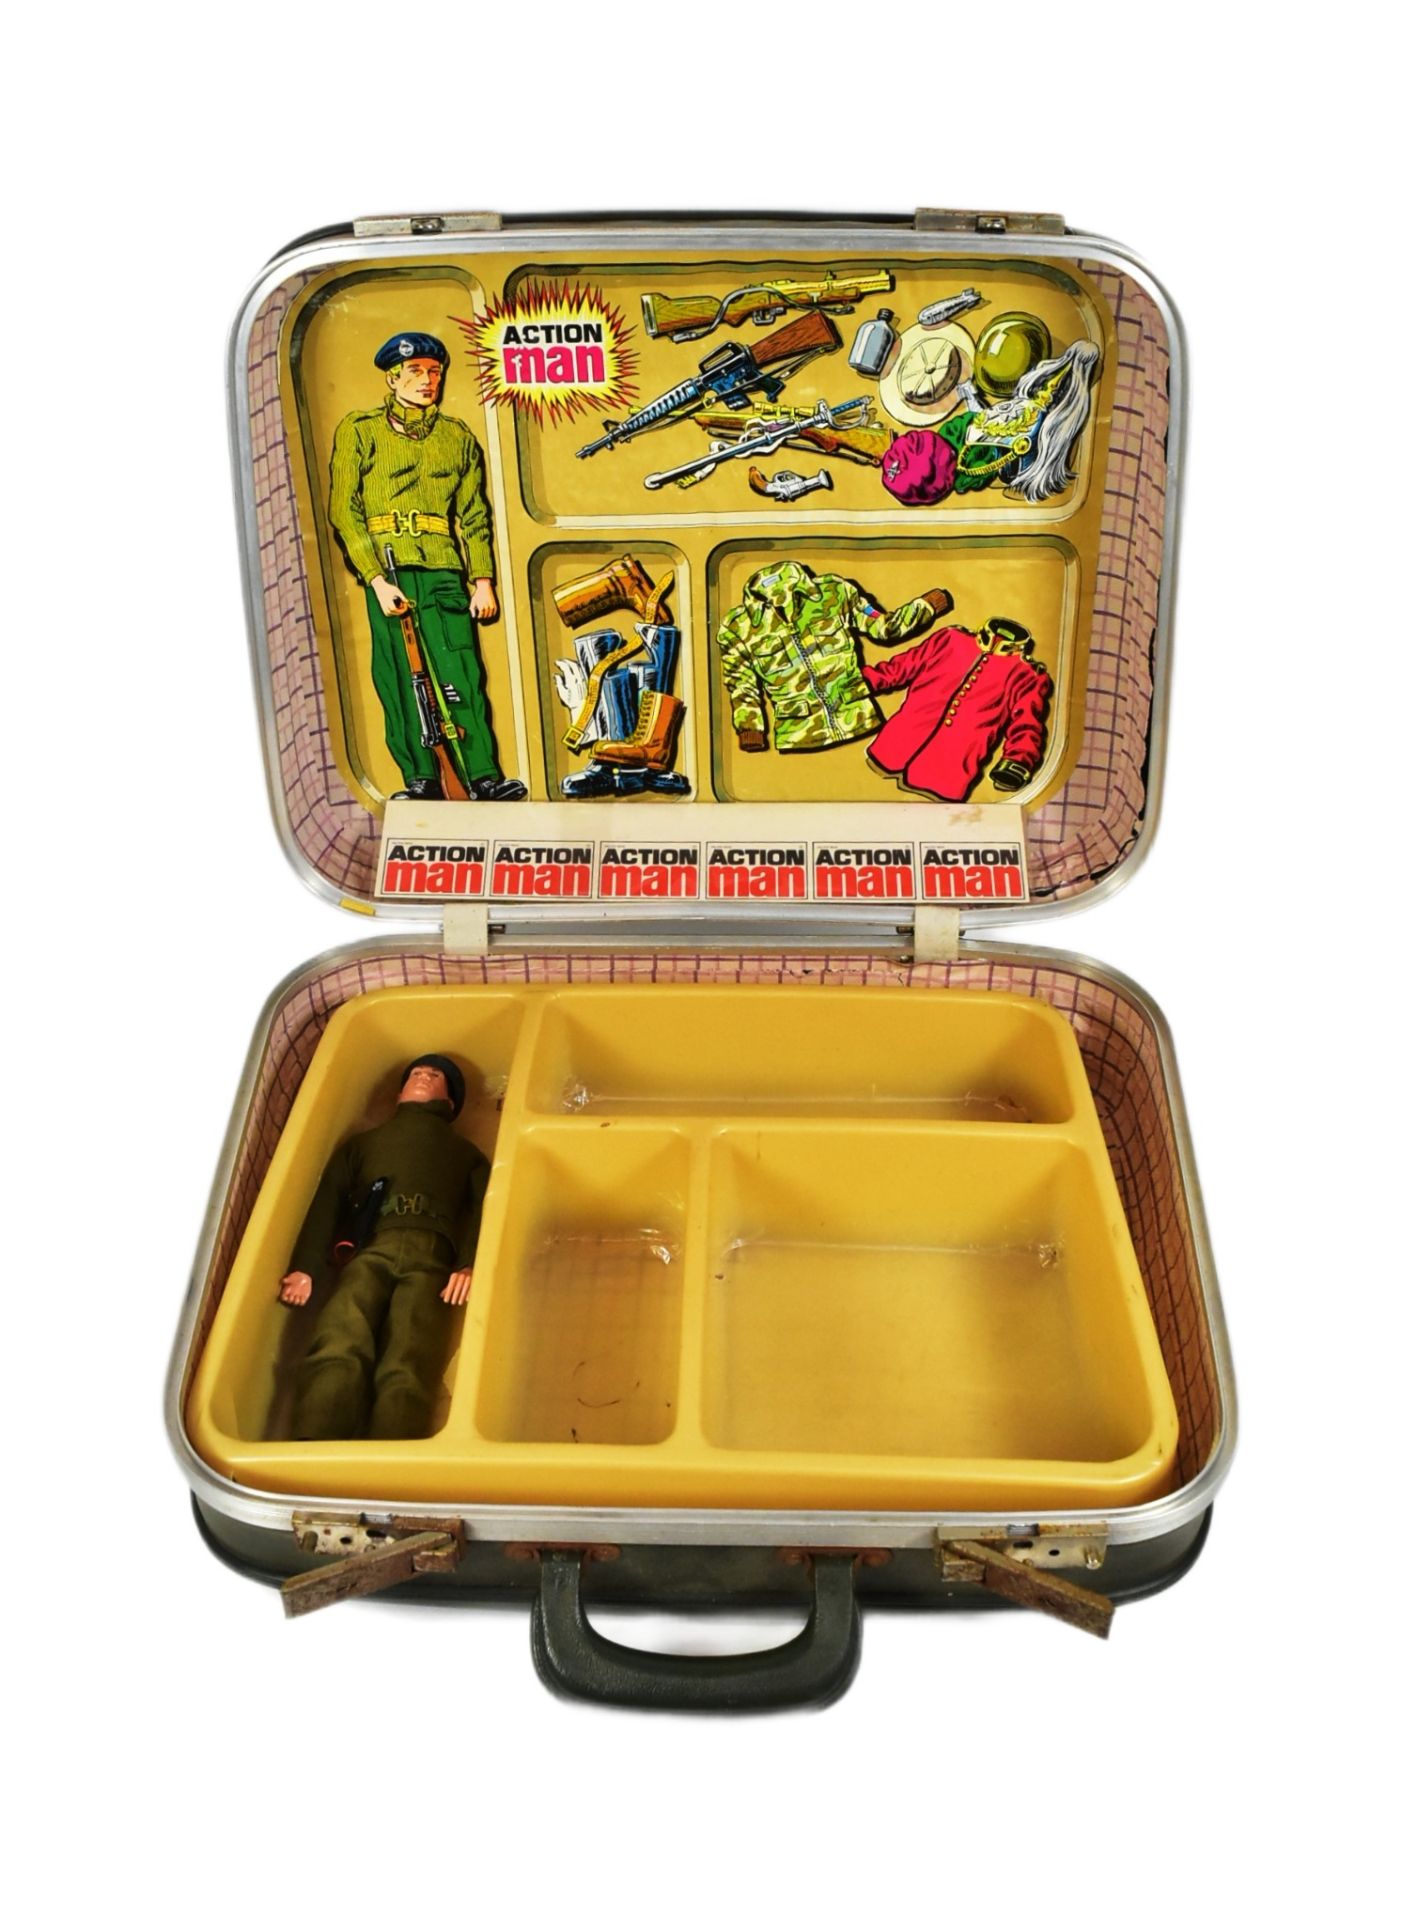 ACTION MAN - PALITOY - SPECIAL MISSION SUITCASE SET